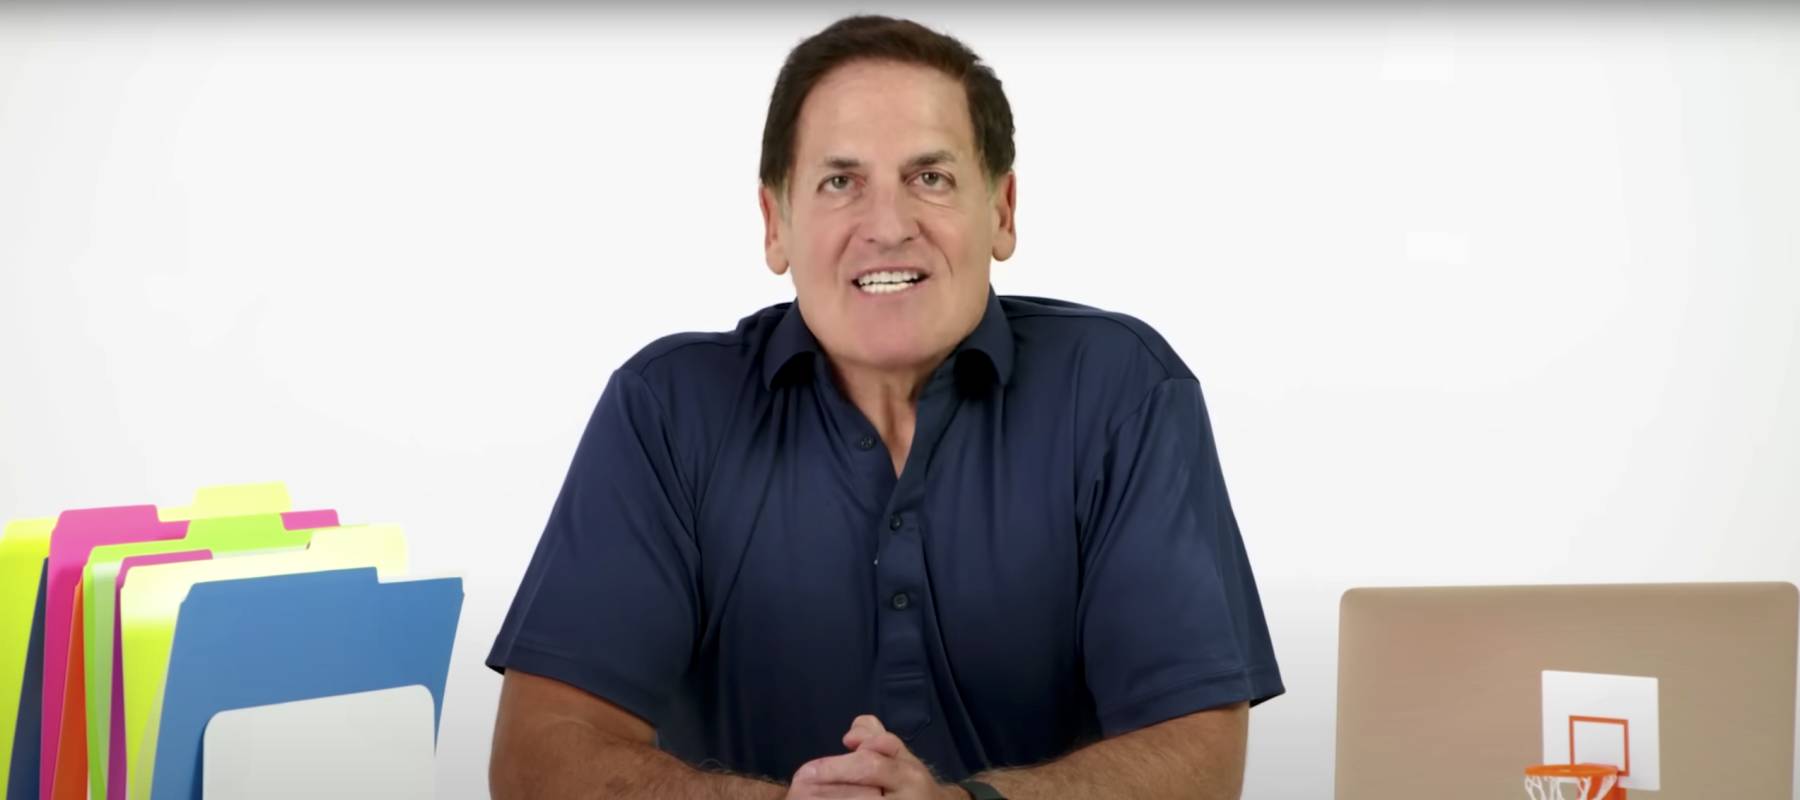 American businessman Mark Cuban tells wired the secret to becoming a billionaire.